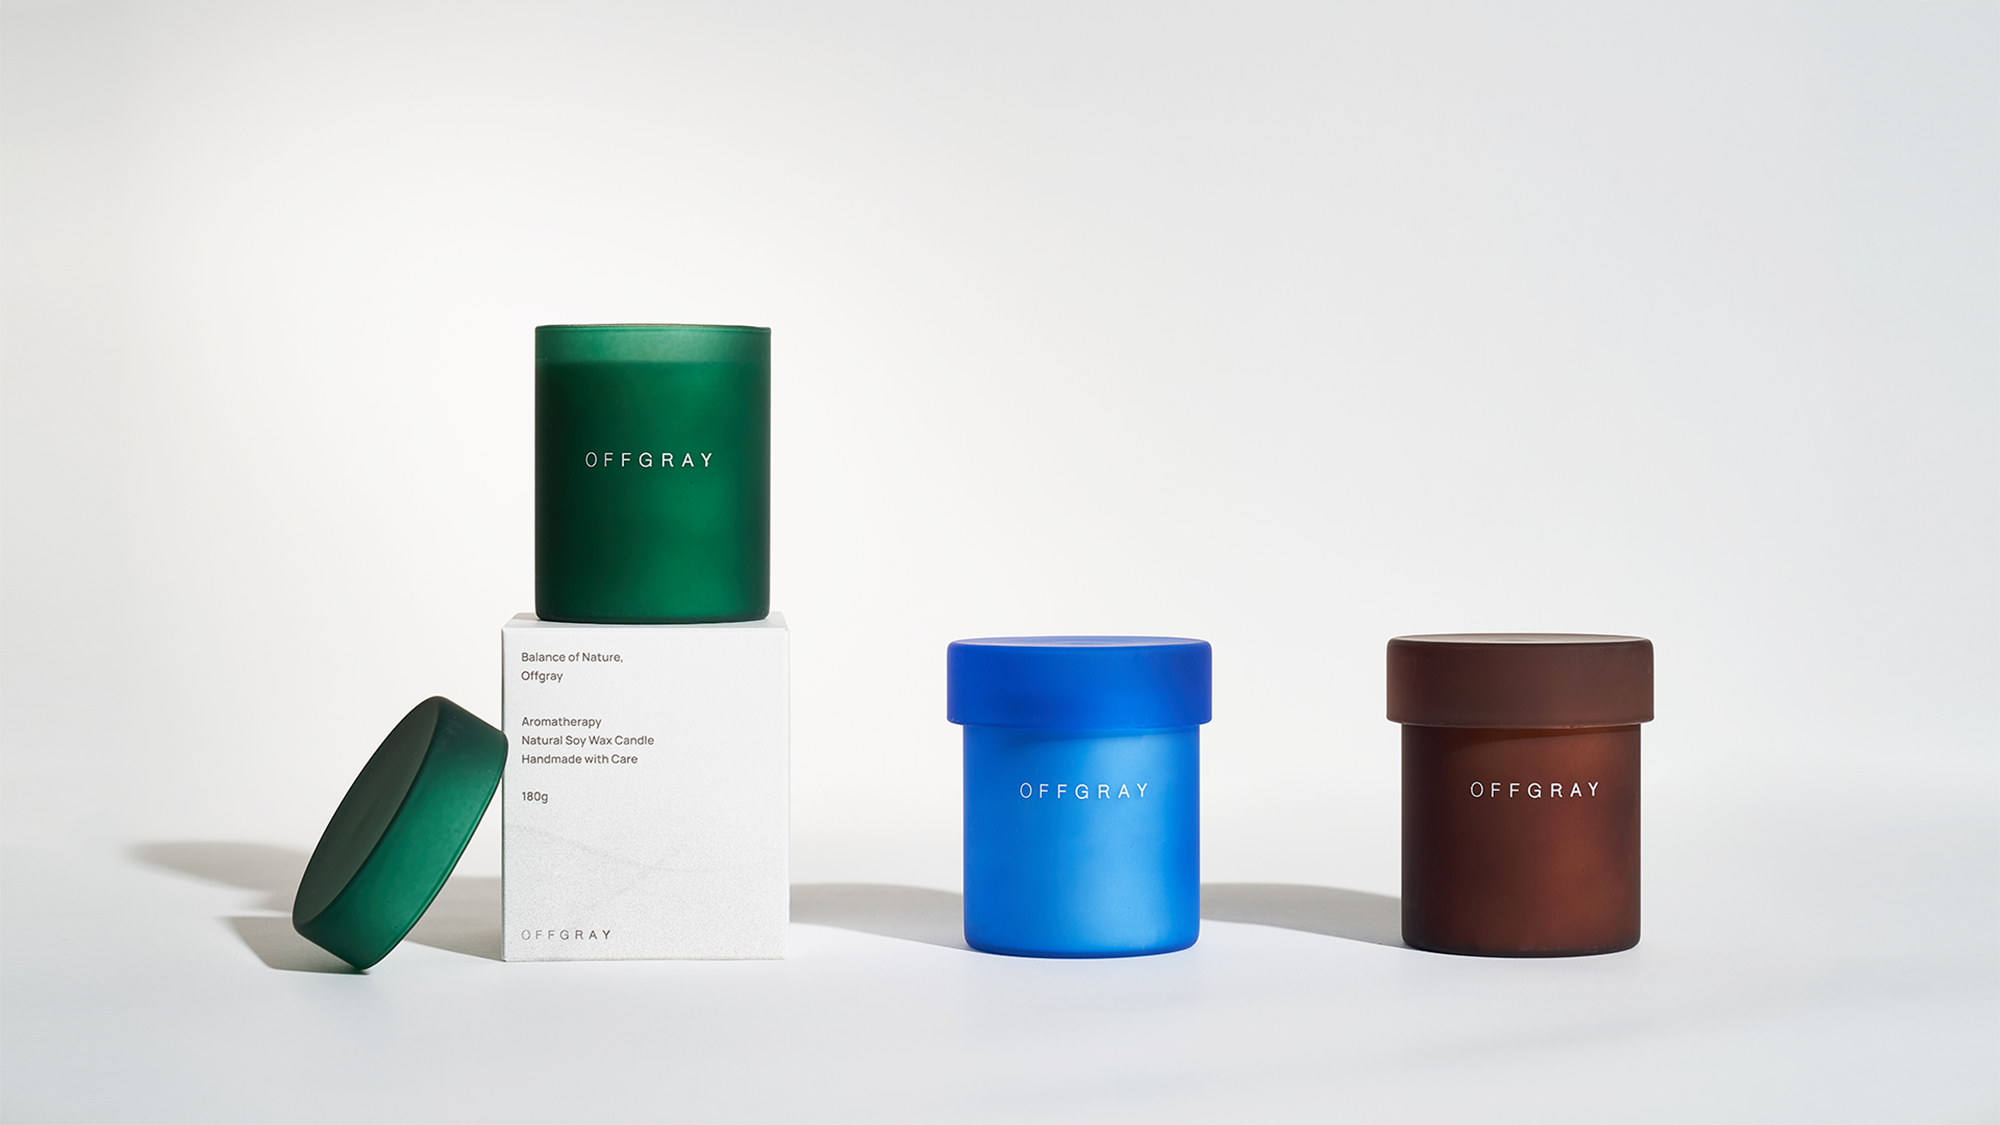 Offgray scent line packaging